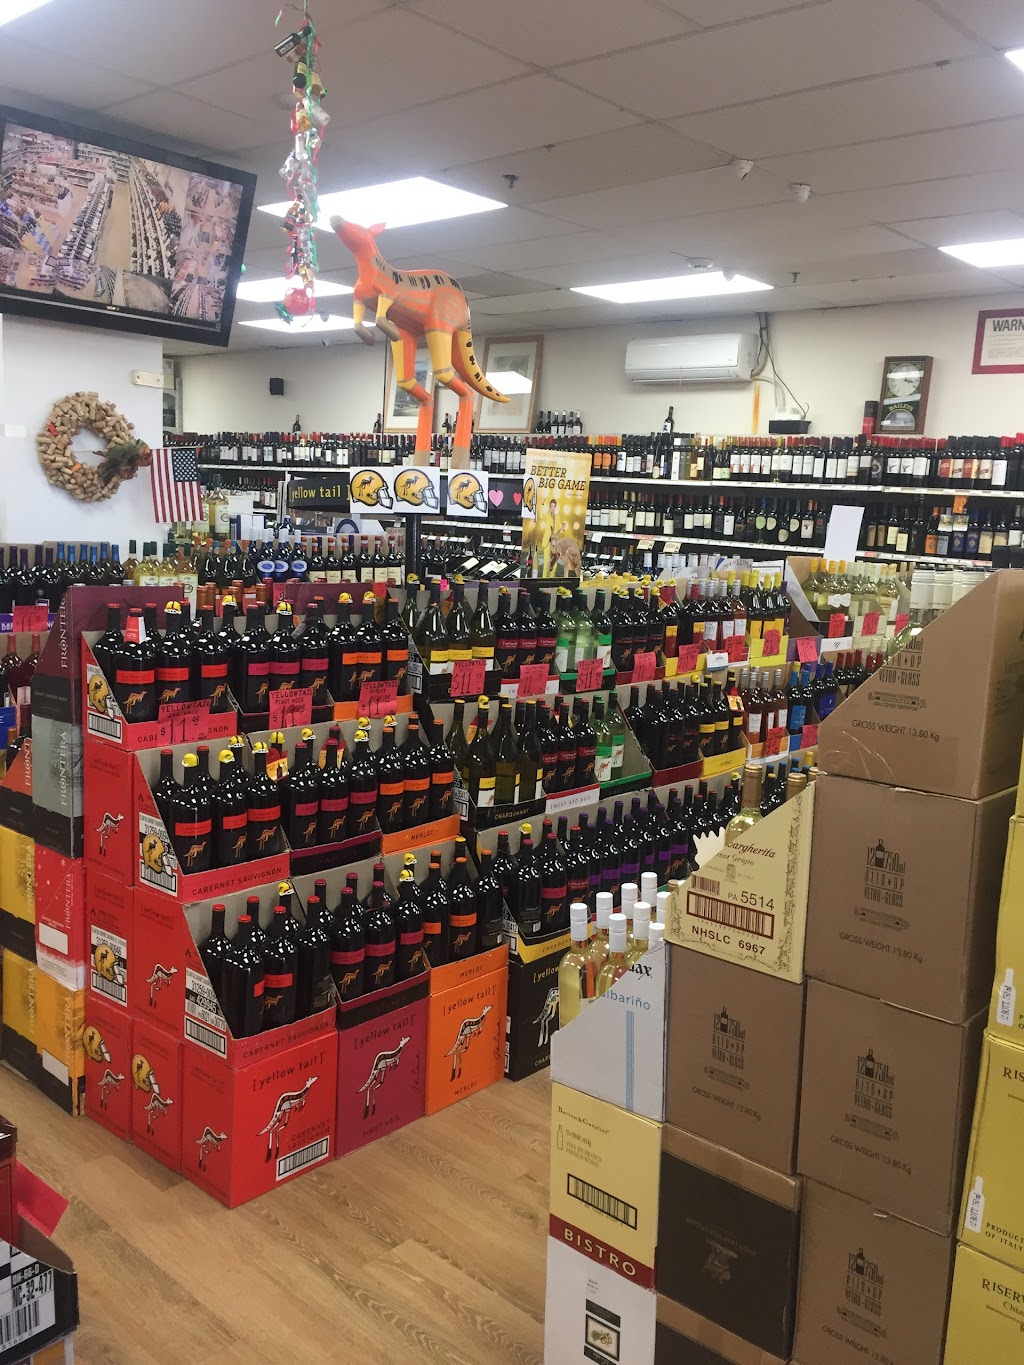 Gram Wines & Liquors | 1207 Middle Country Rd, Middle Island, NY 11953 | Phone: (631) 924-0127